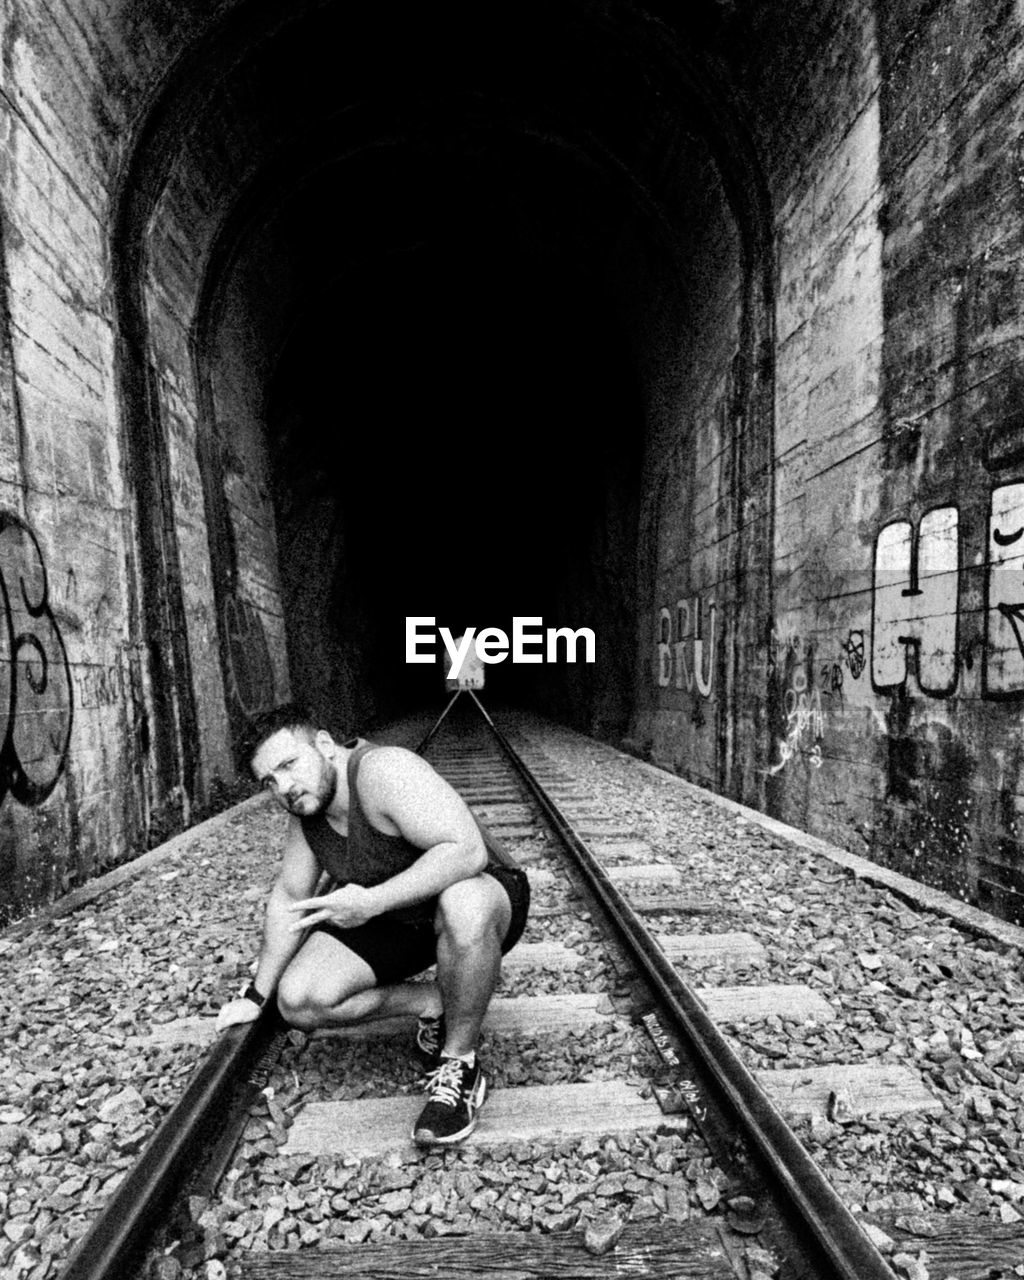 one person, track, railroad track, full length, rail transportation, architecture, black and white, adult, tunnel, monochrome, infrastructure, lifestyles, arch, monochrome photography, built structure, transportation, men, person, public transportation, day, sitting, casual clothing, leisure activity, young adult, wall - building feature, graffiti